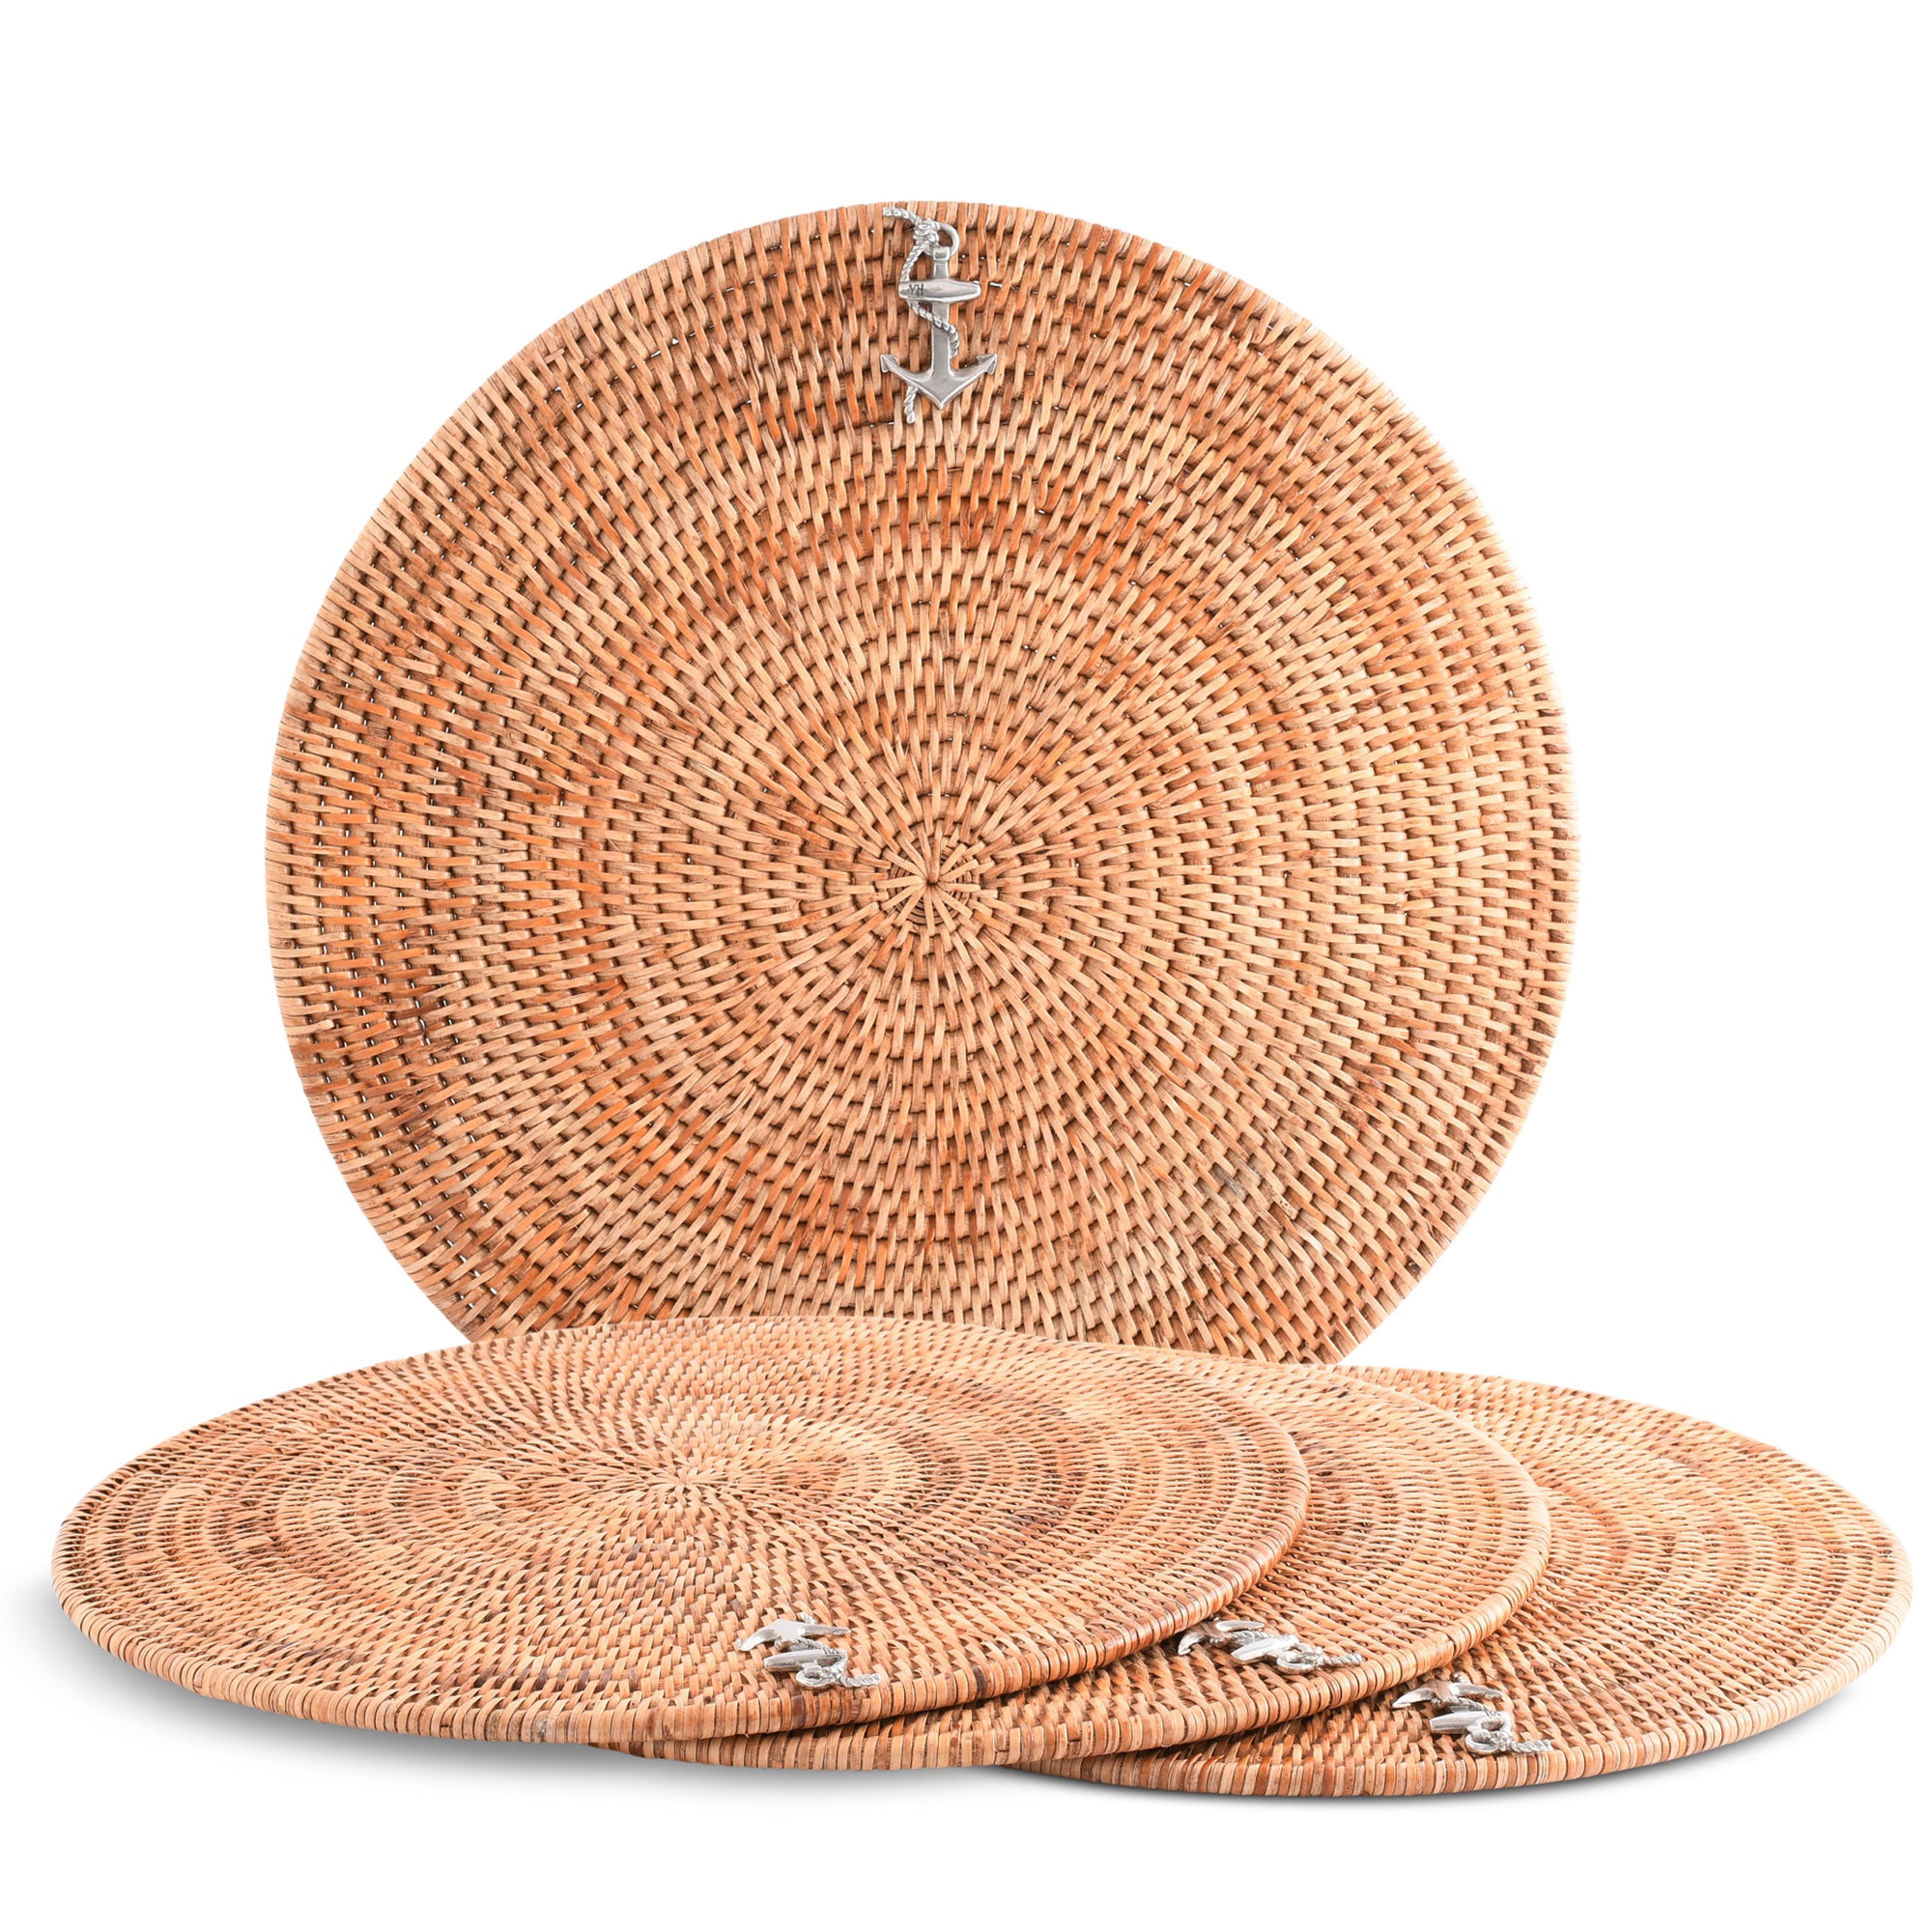 Vagabond House Anchor Placemat Hand Woven Wicker Rattan Round - Set of 4 Product Image